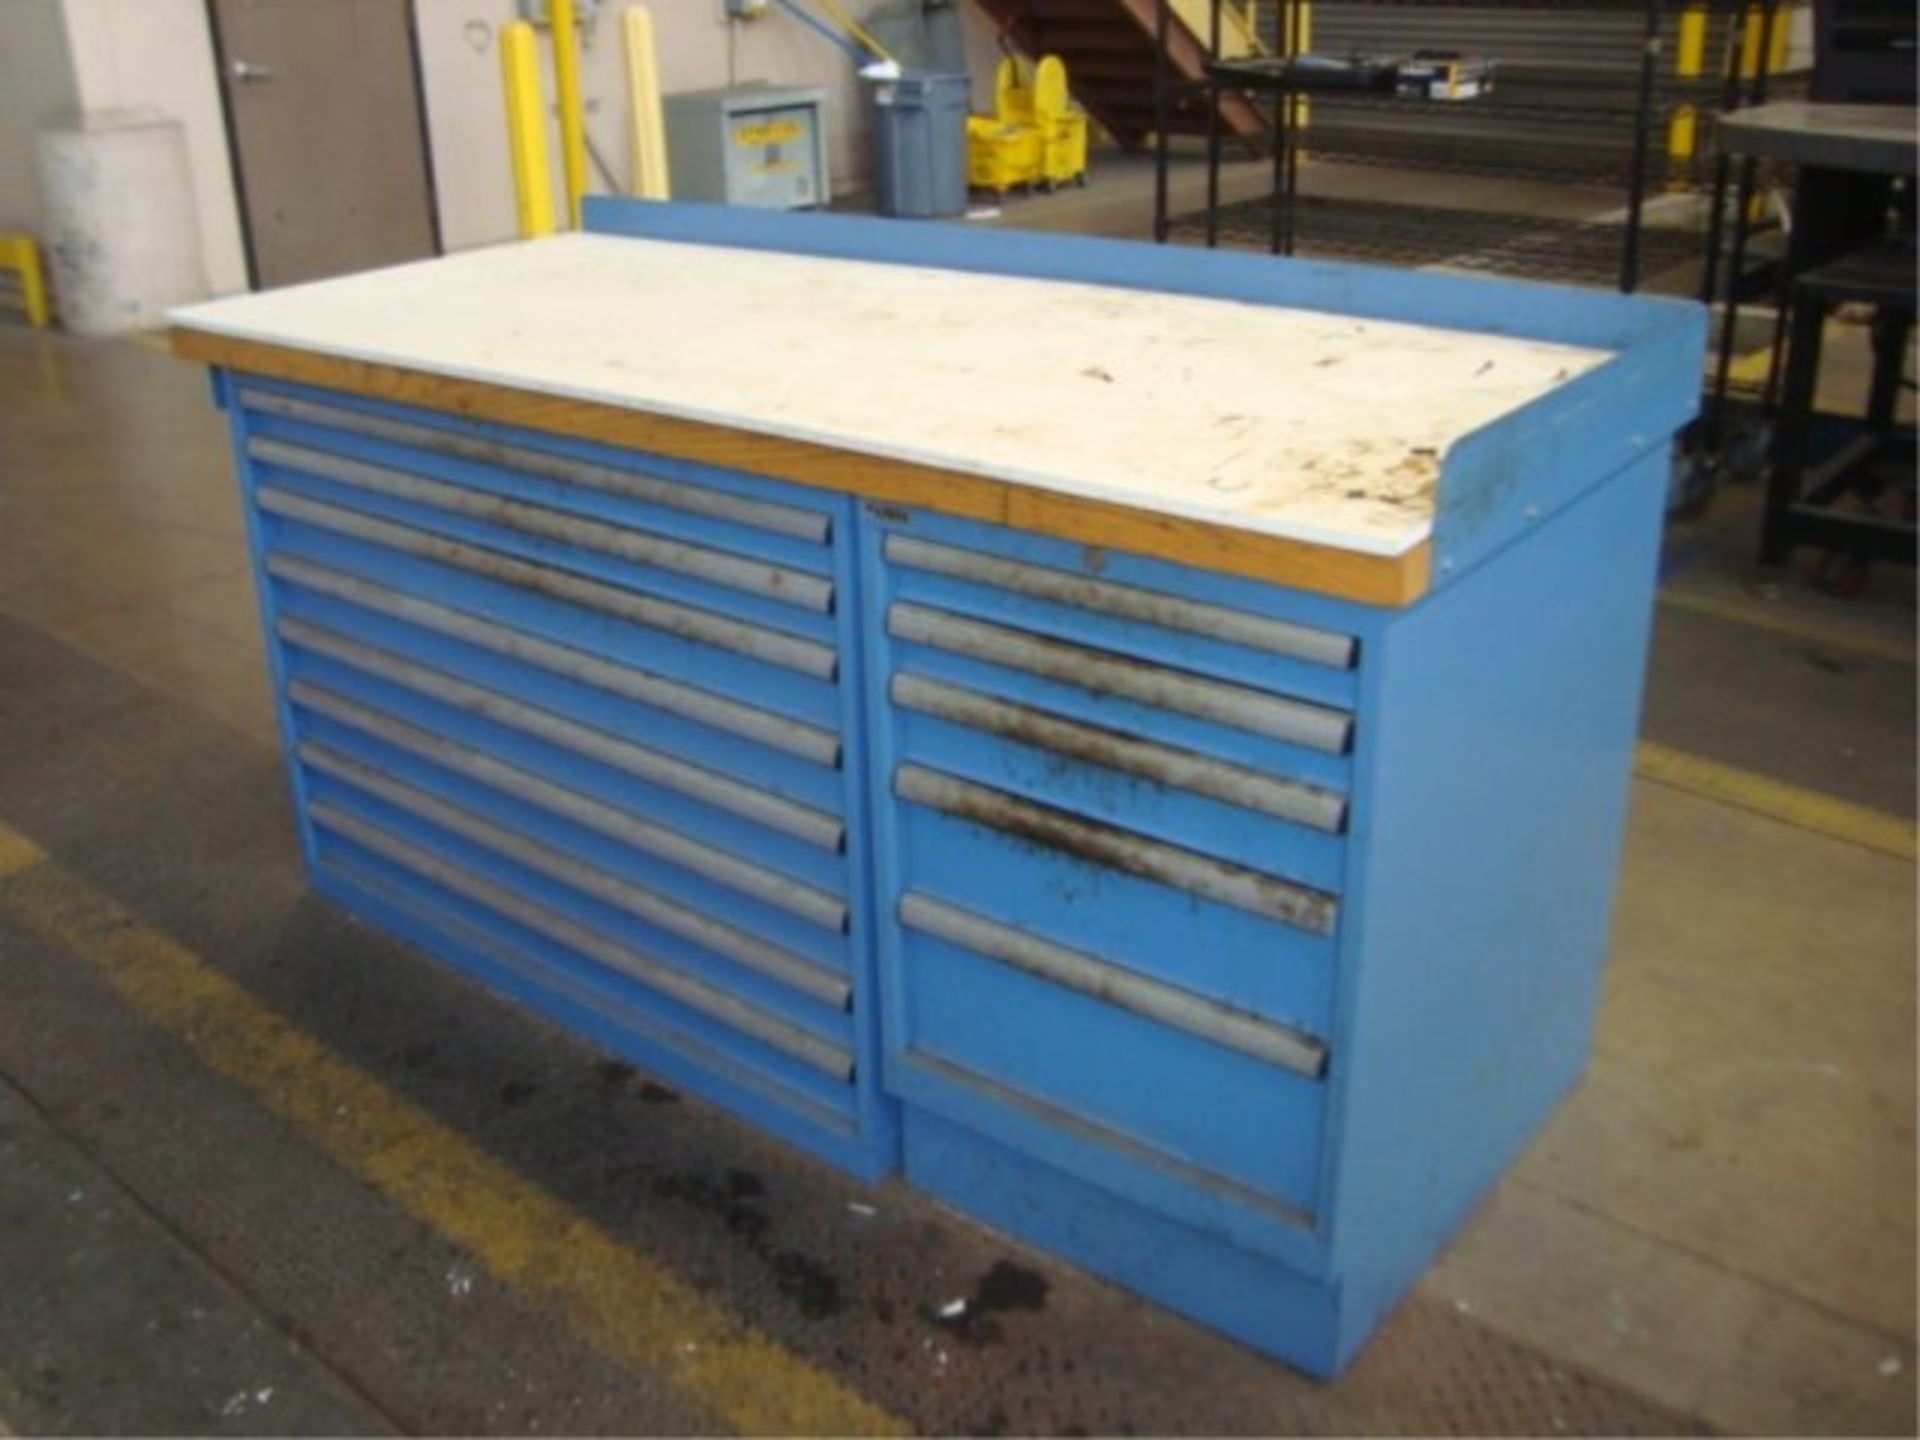 Workbench With Parts Supply Cabinets - Image 2 of 5